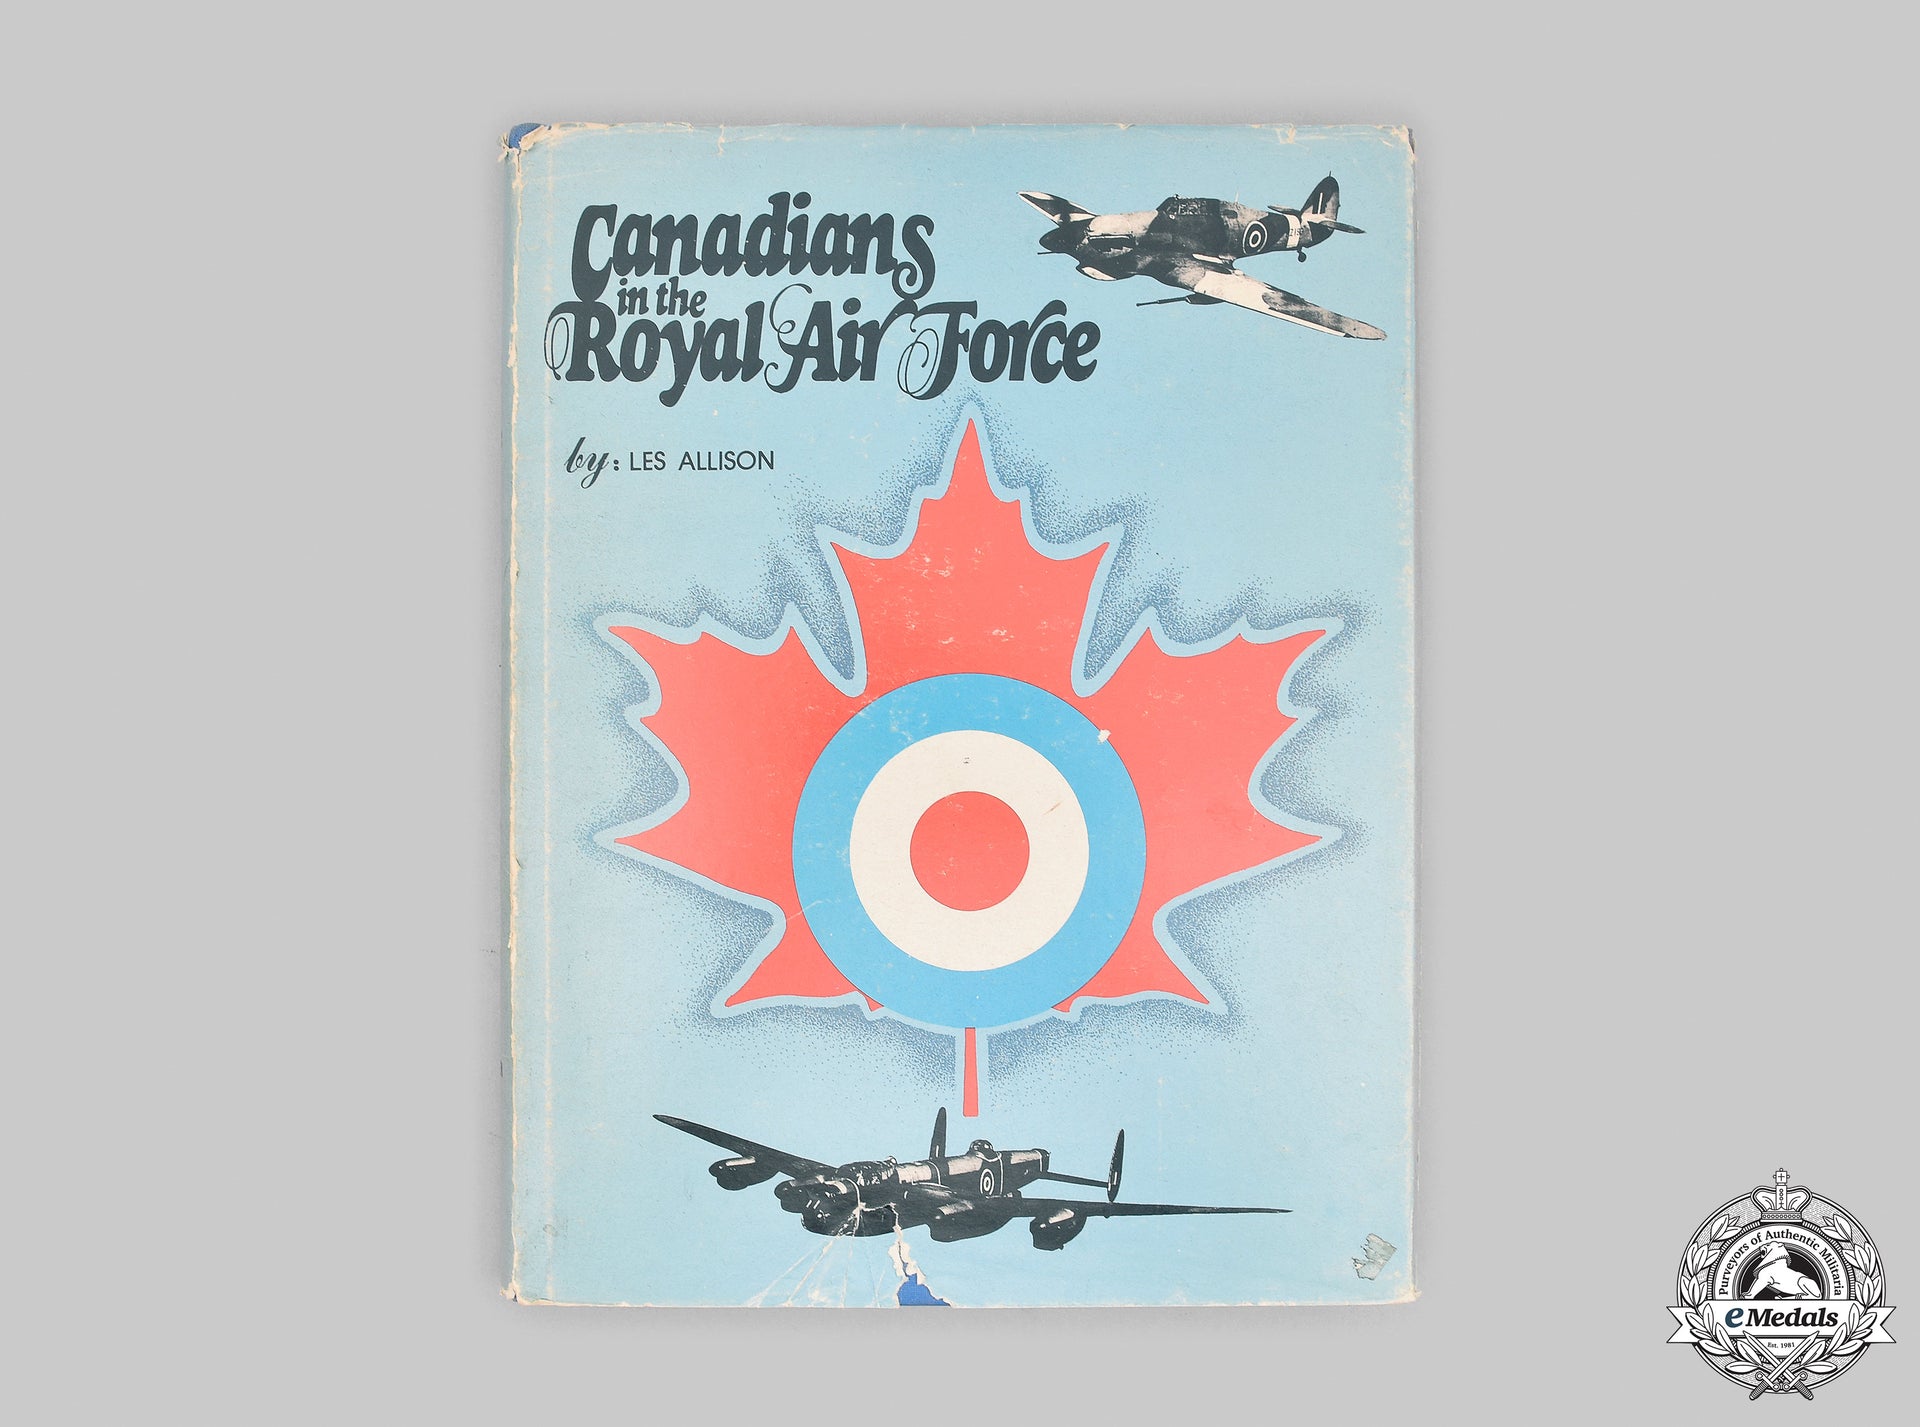 canada._canadians_in_the_royal_air_force,_signed_by_author_les_allison__mnc5681_m20_0682